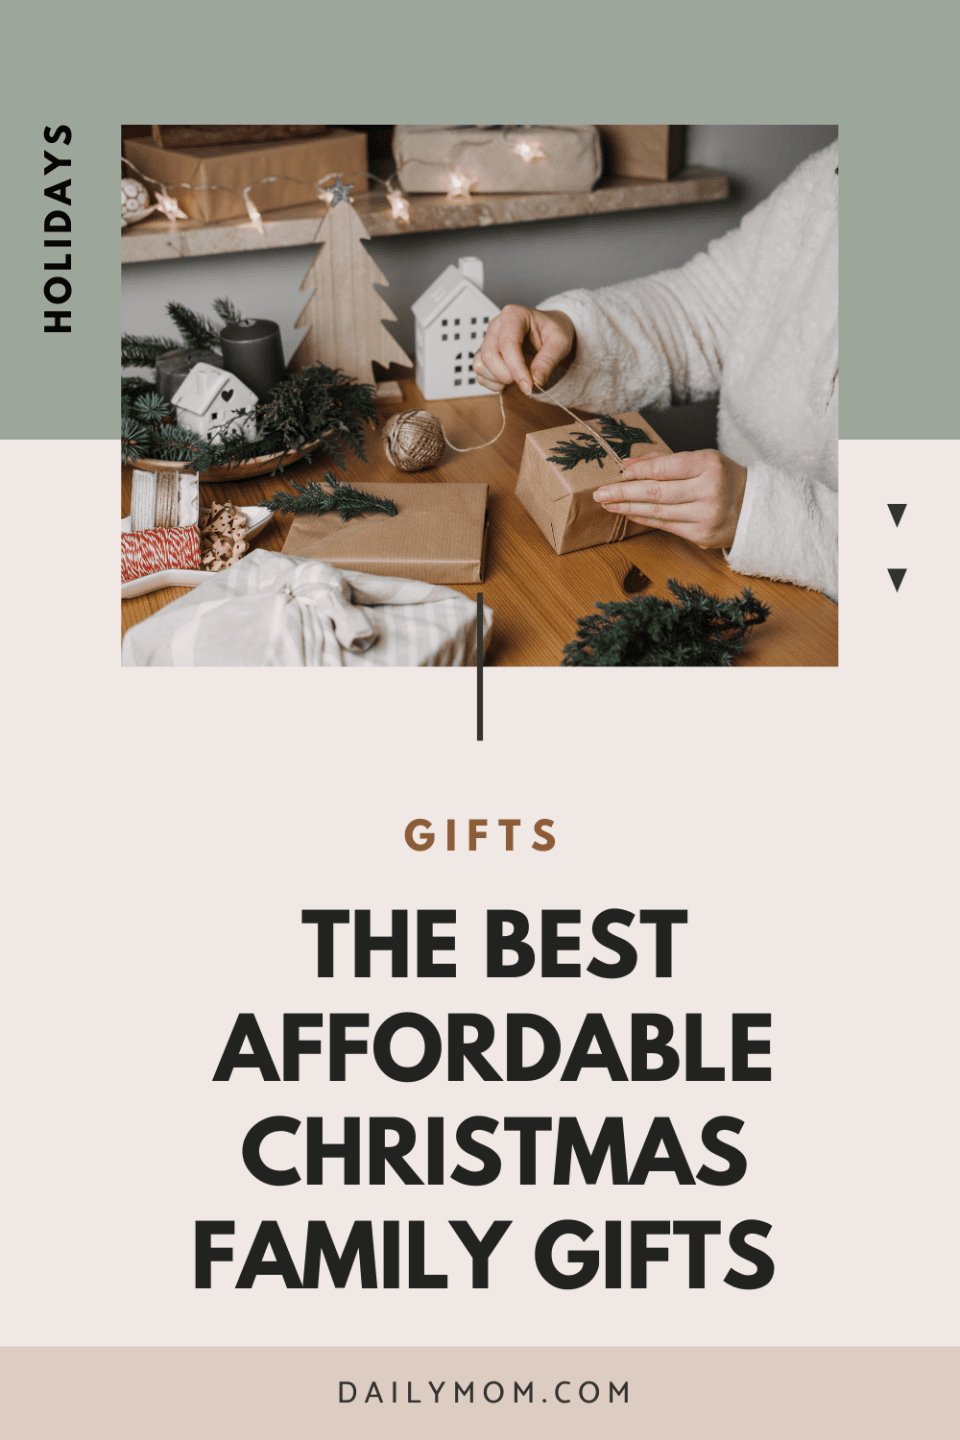 Best Family Christmas Gift Ideas And Group Christmas Ideas For Large Families That The Entire Family Will Love On A Budget In 2023 1 Daily Mom, Magazine For Families